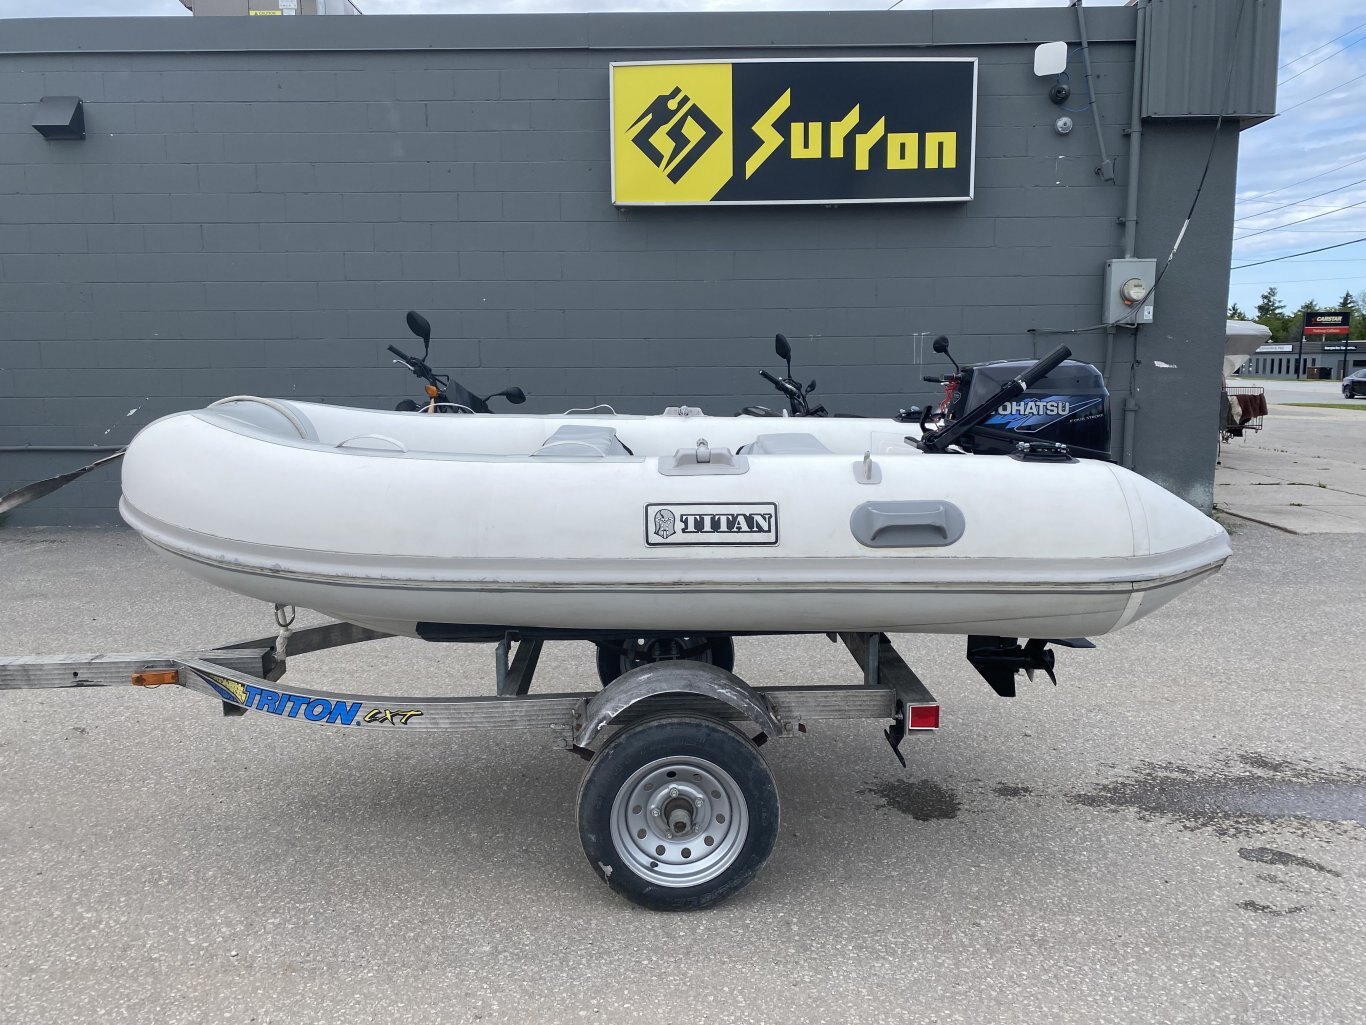 Boat Package Deal - 2011 10' Titan Inflatable with 2022 NEW Karavan Trailer & 9.8 Tohatsu Outboard